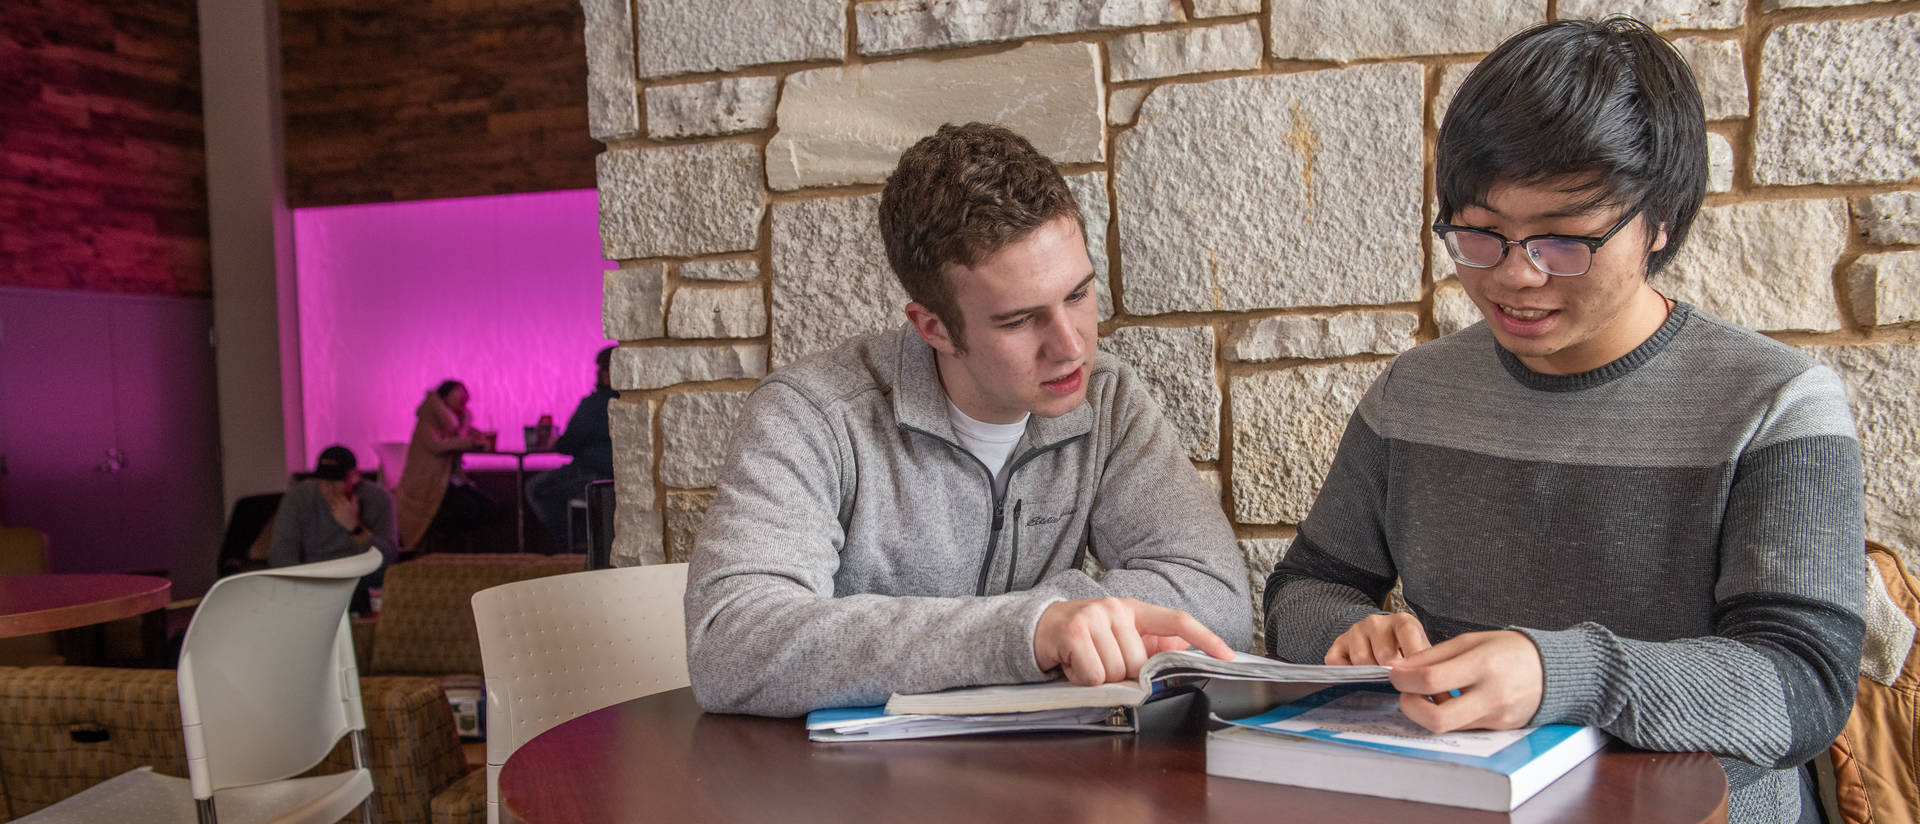 UW-Eau Claire students study at the Cabin coffee shop on campus.